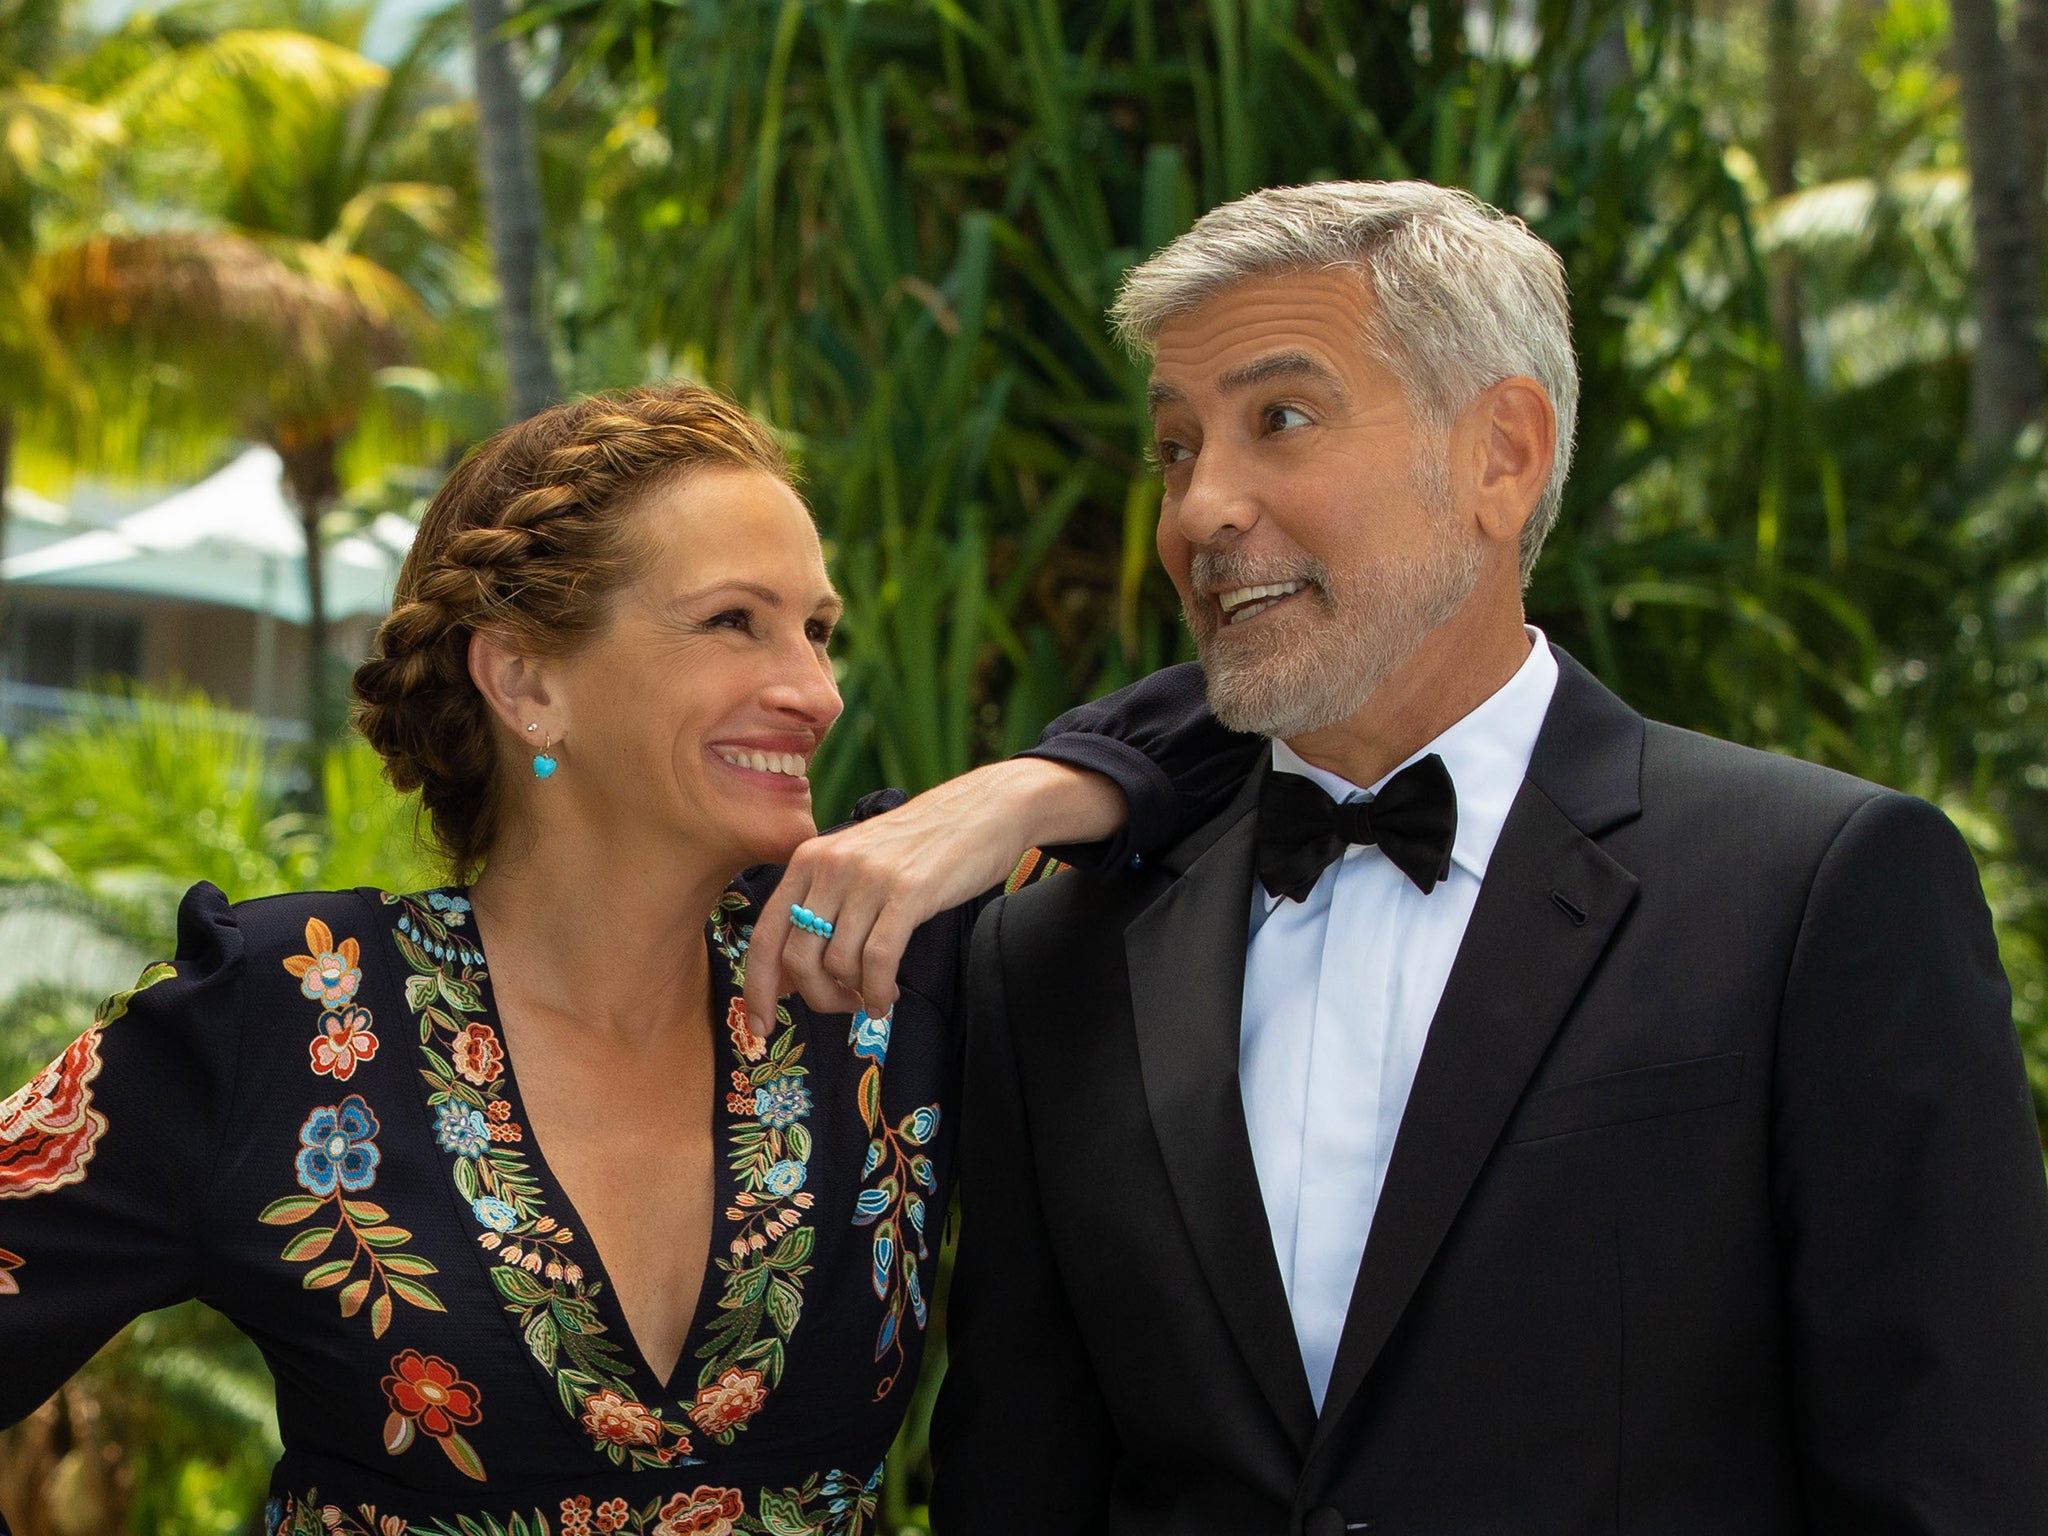 George Clooney says kissing Julia Roberts in Ticket to Paradise wa  'ridiculous': 'It's like kissing your best friend